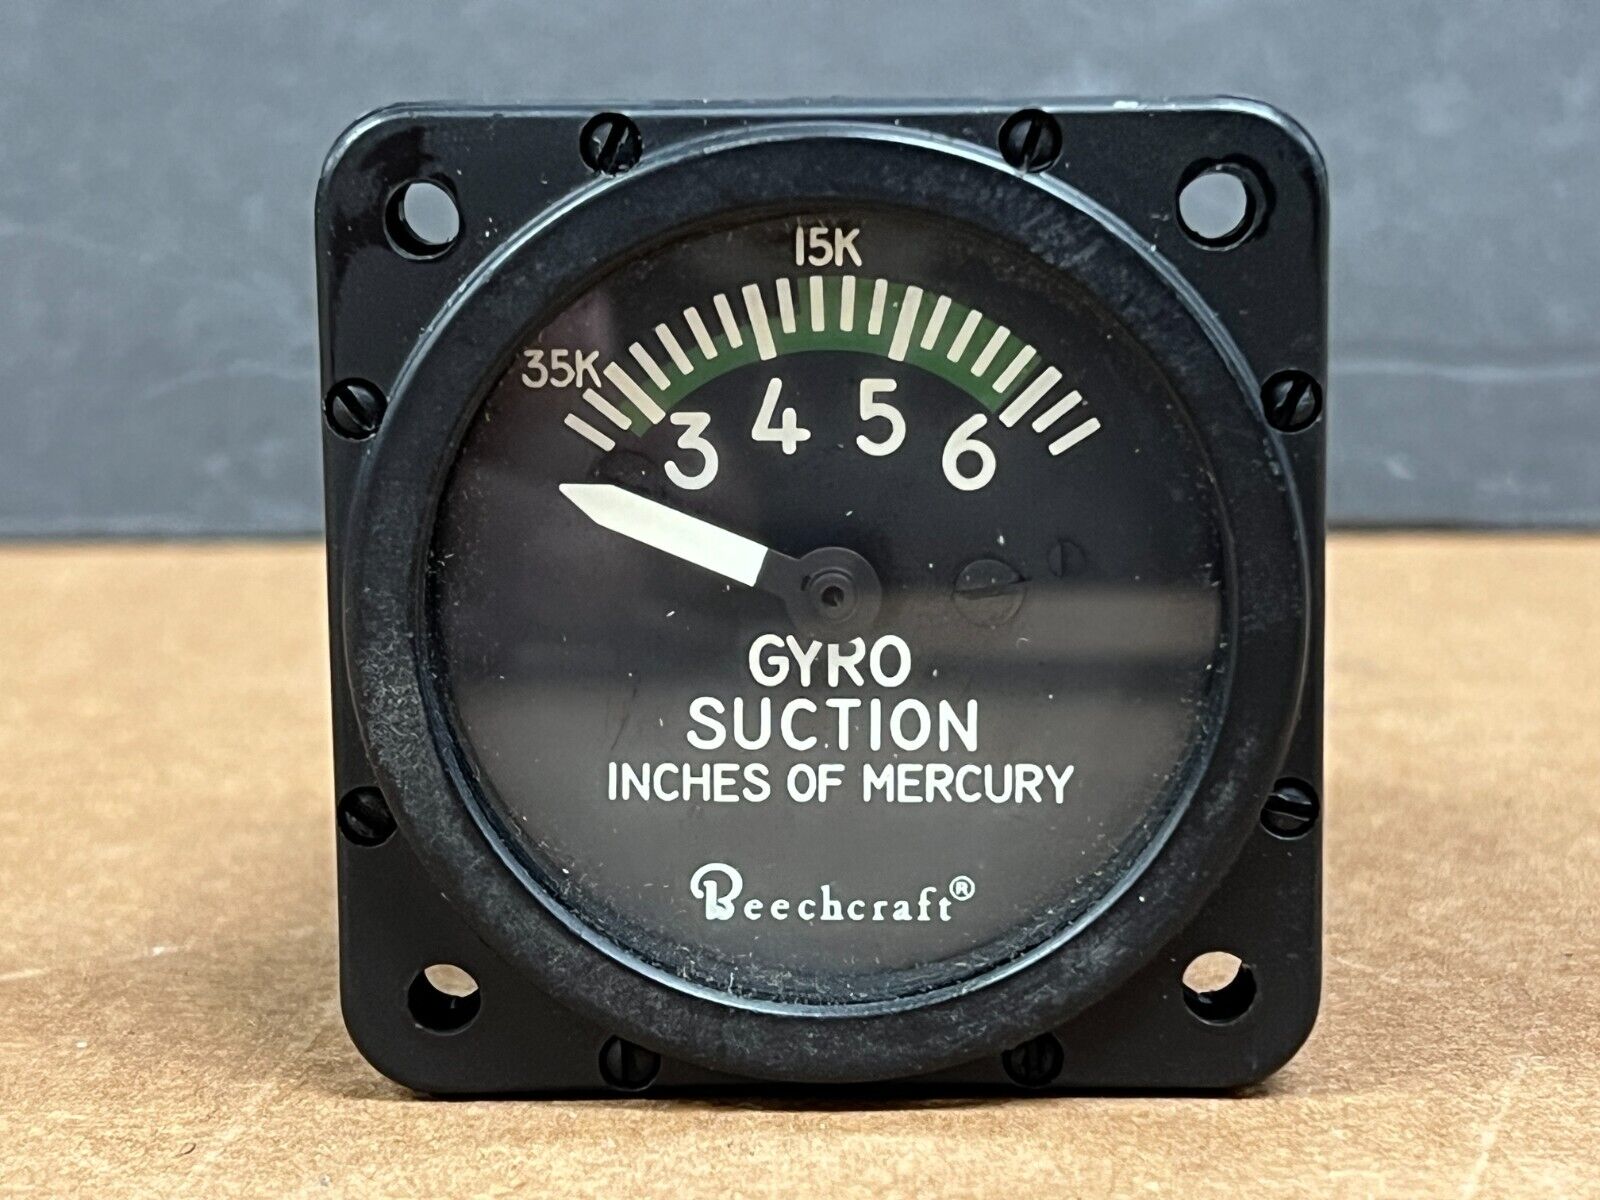 Beechcraft Gyro Suction P/N 101-384133-1 As Removed